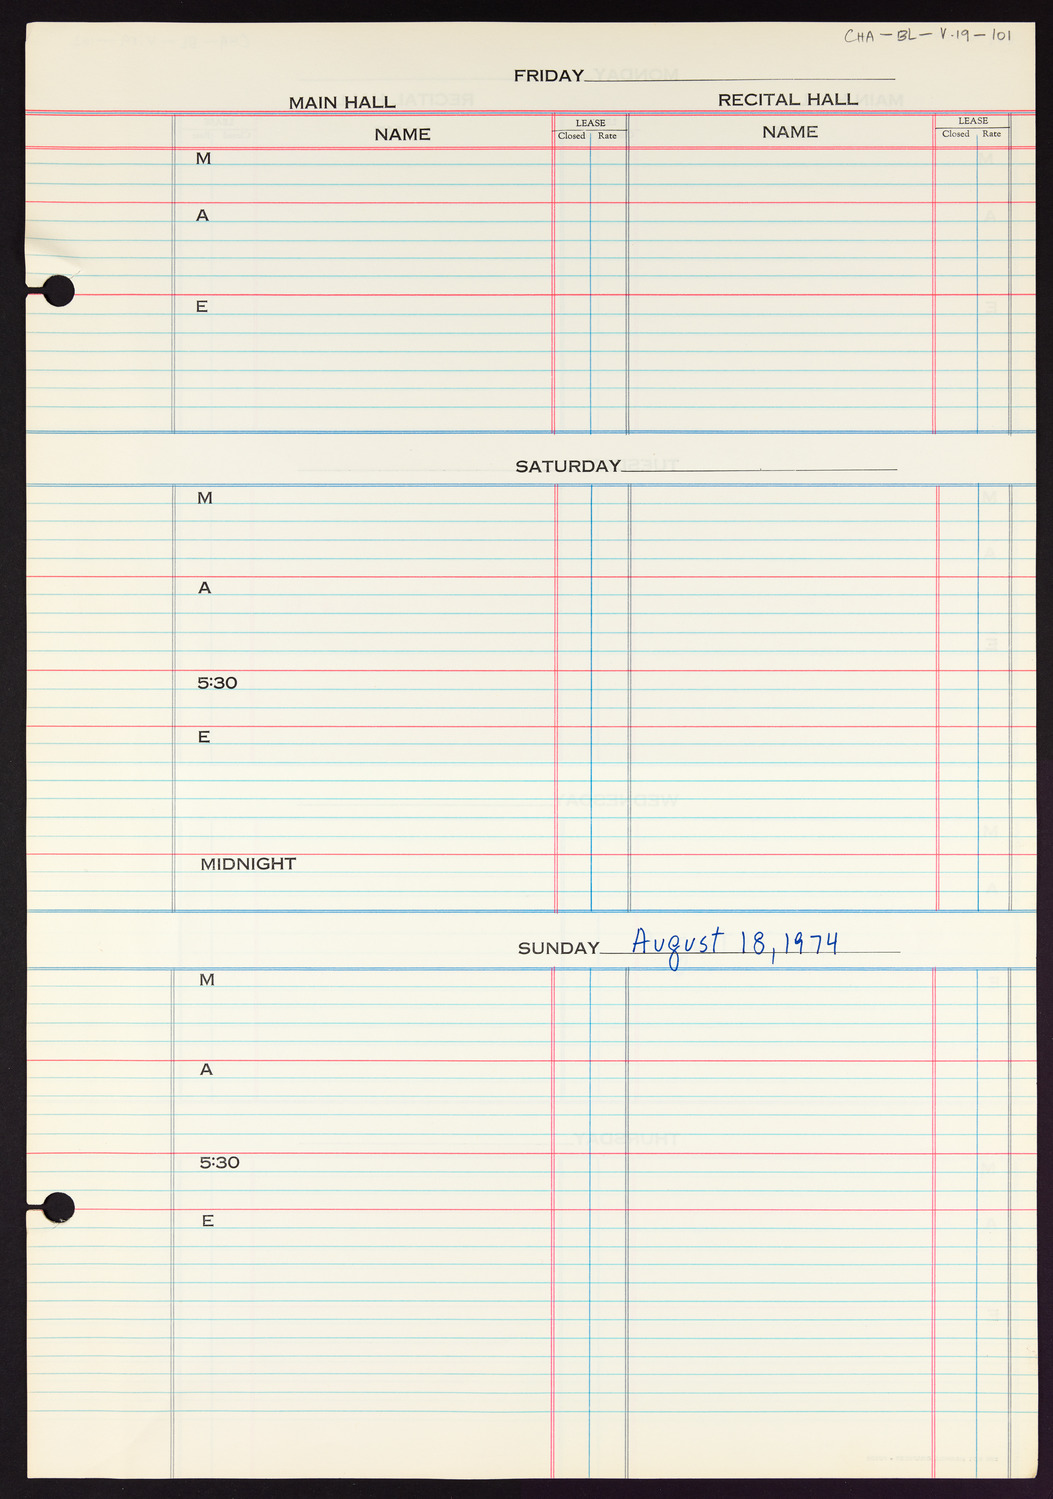 Carnegie Hall Booking Ledger, volume 19, page 101